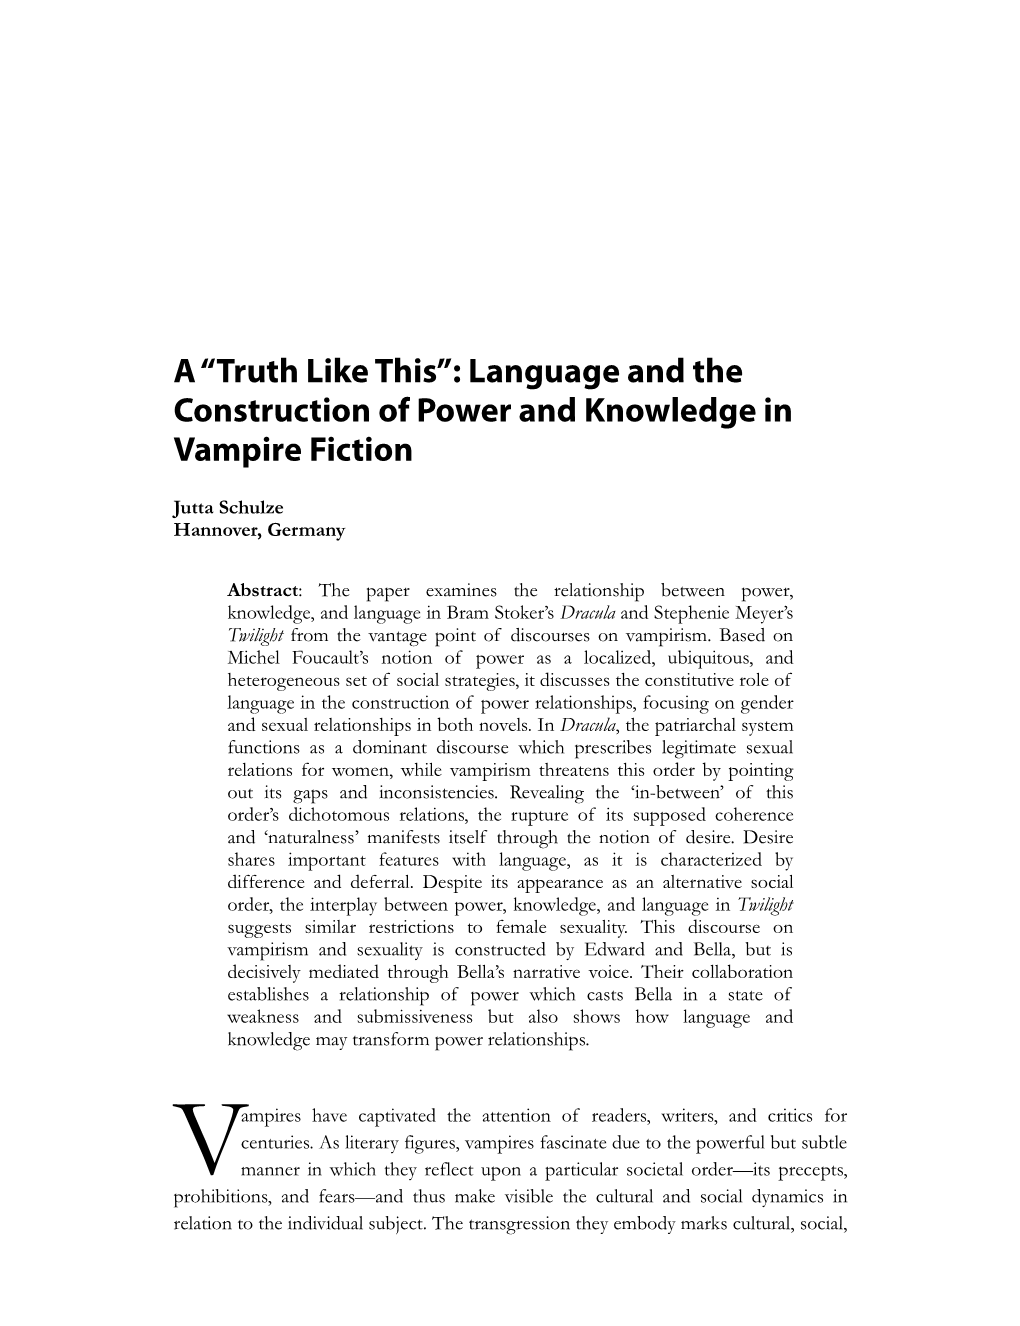 Language and the Construction of Power and Knowledge in Vampire Fiction